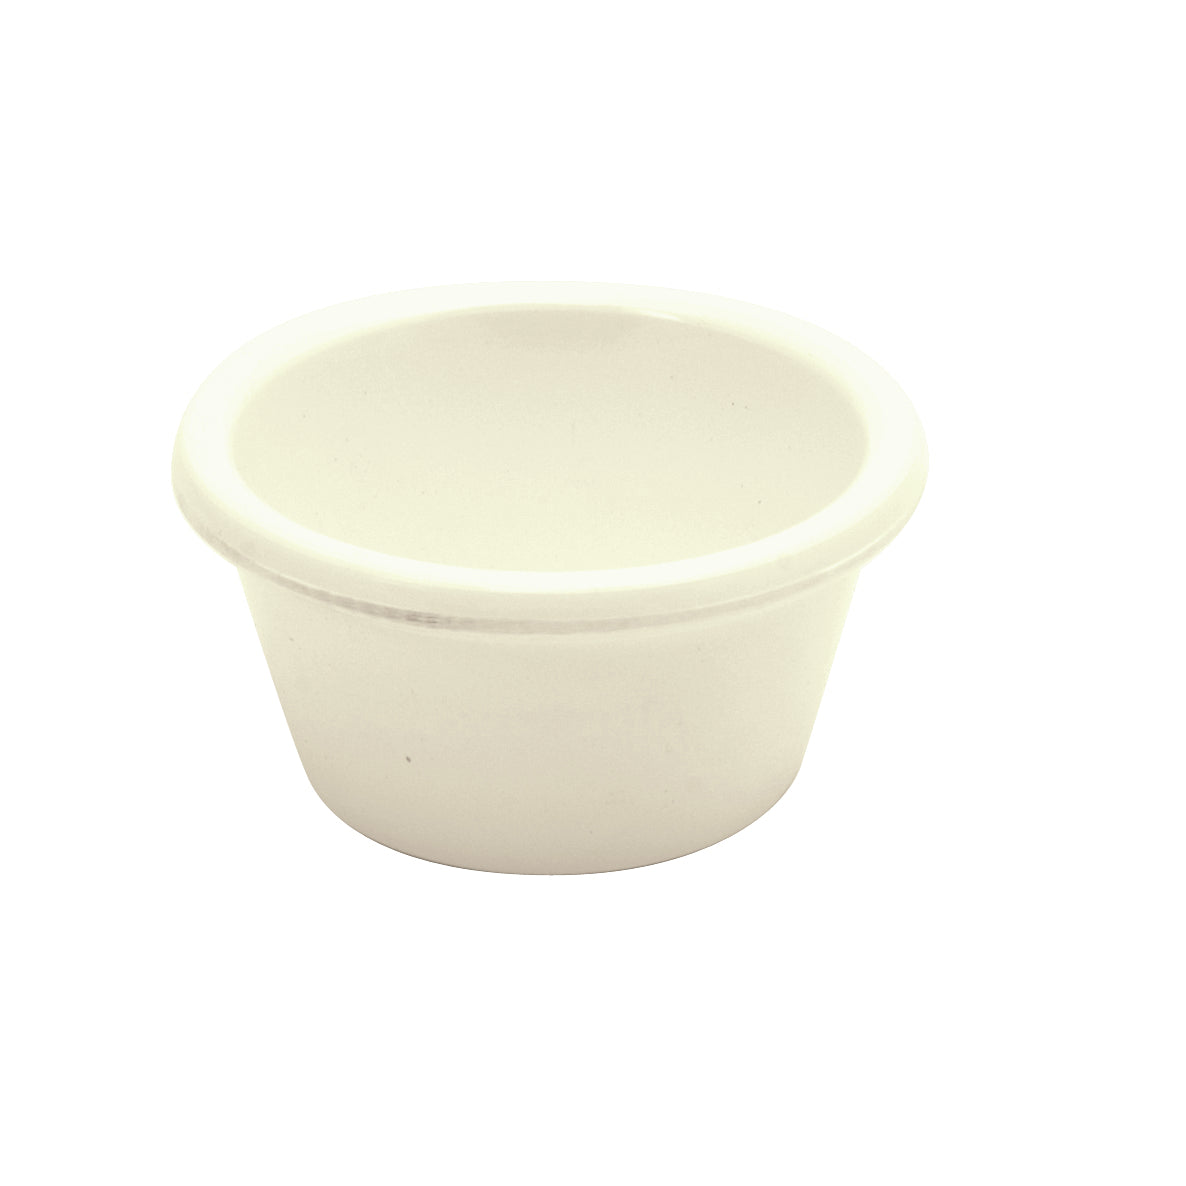 Ramekin - Bone, 72 x 40mm-60ml from Ryner Melamine. Sold in boxes of 72. Hospitality quality at wholesale price with The Flying Fork! 